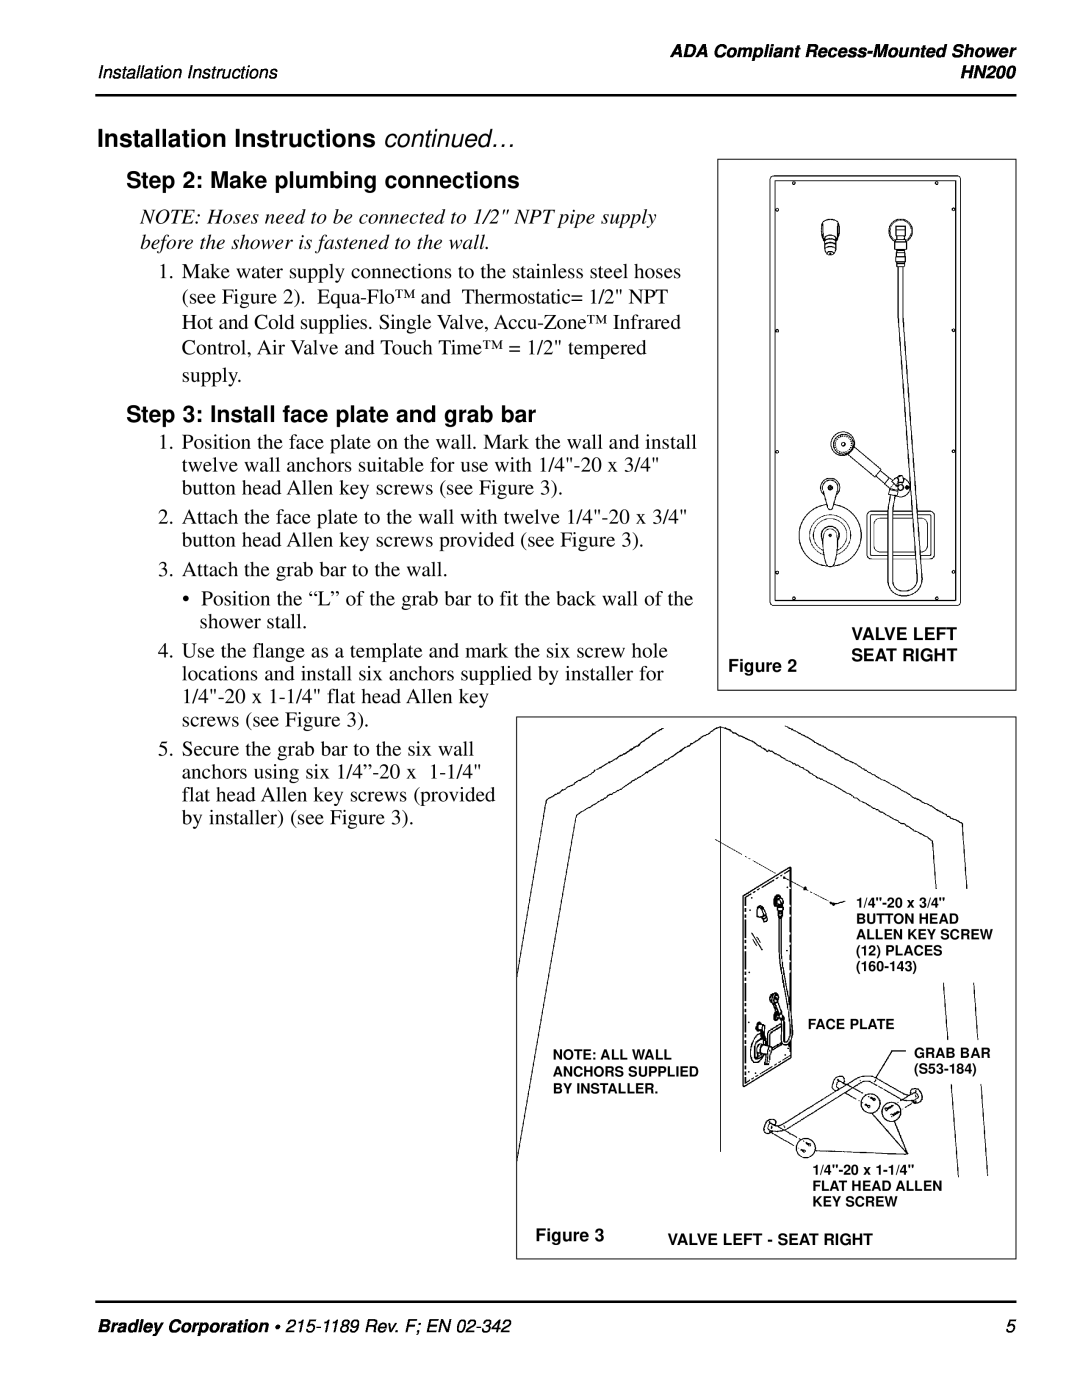 Bradley Smoker HN200 Installation Instructions continued…, Make plumbing connections, Install face plate and grab bar 